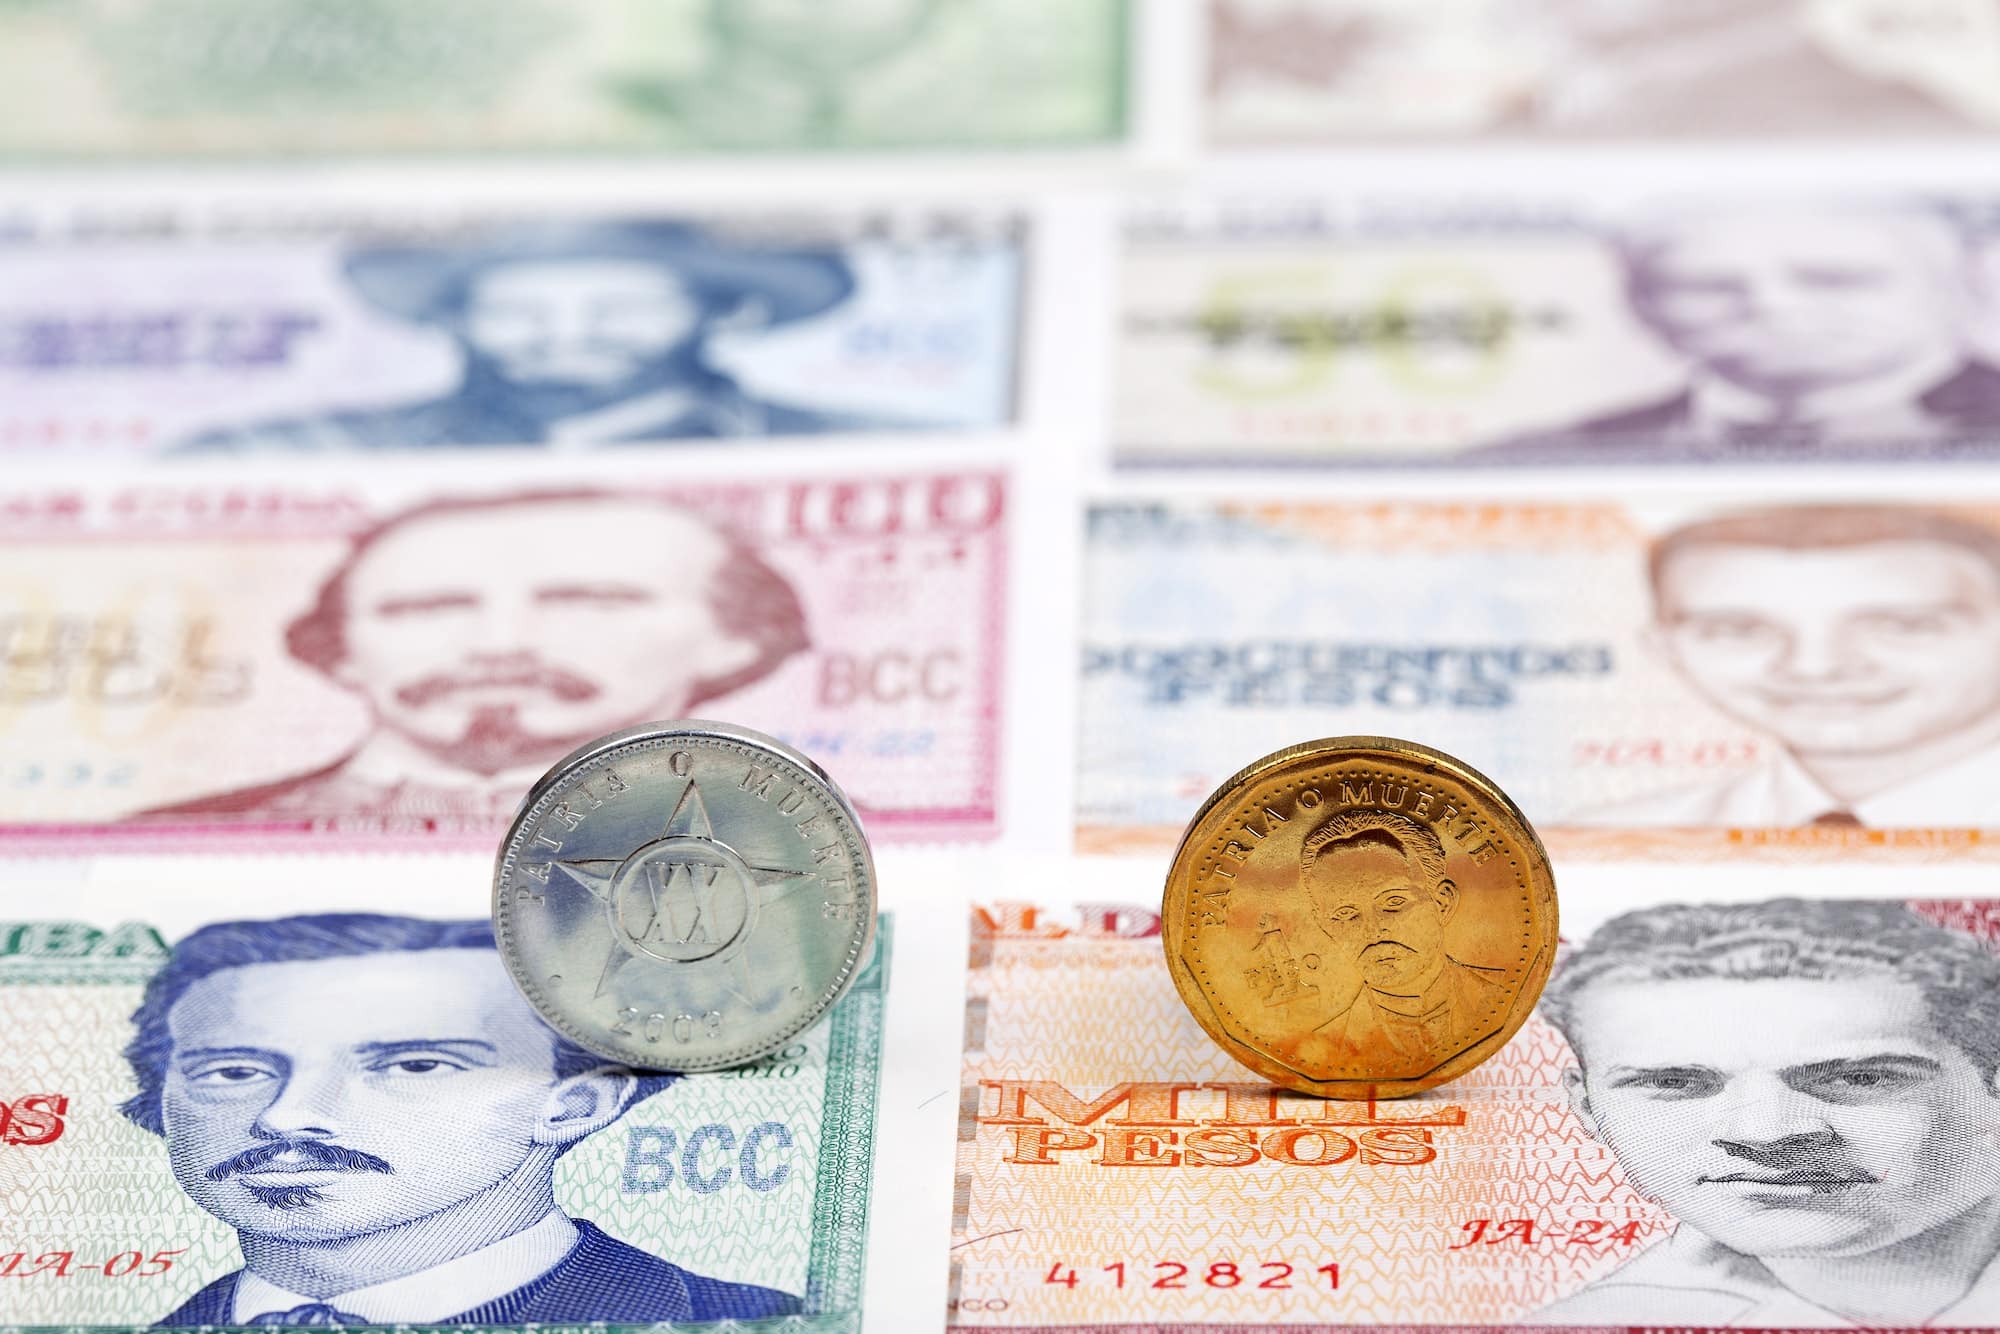 Cuban coins on a background of money